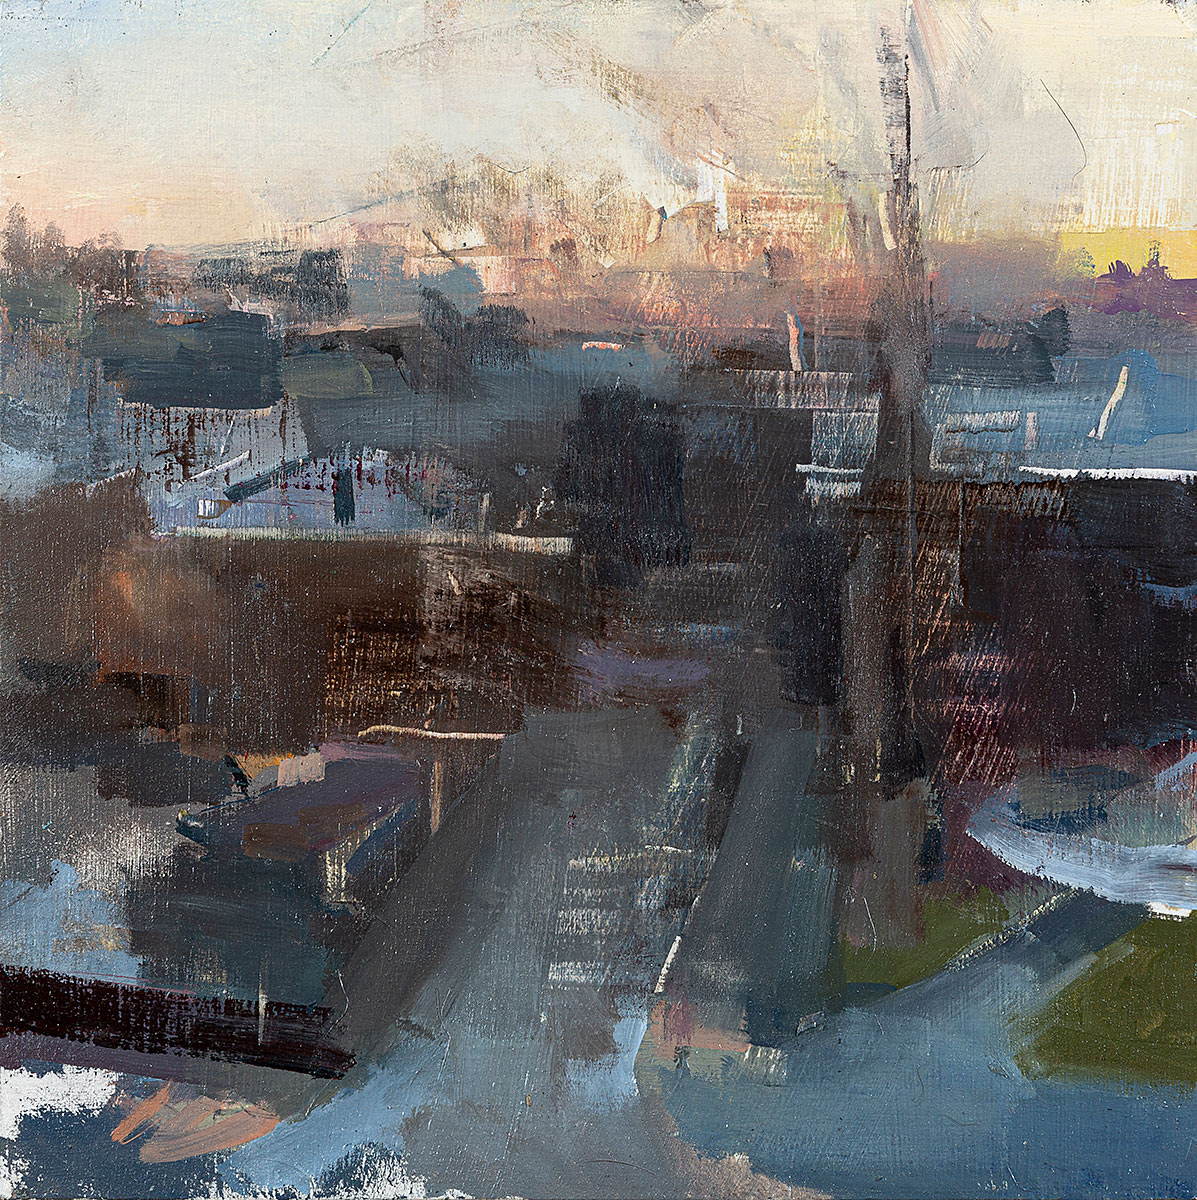 "Philly Morning, Spruce Street, January"